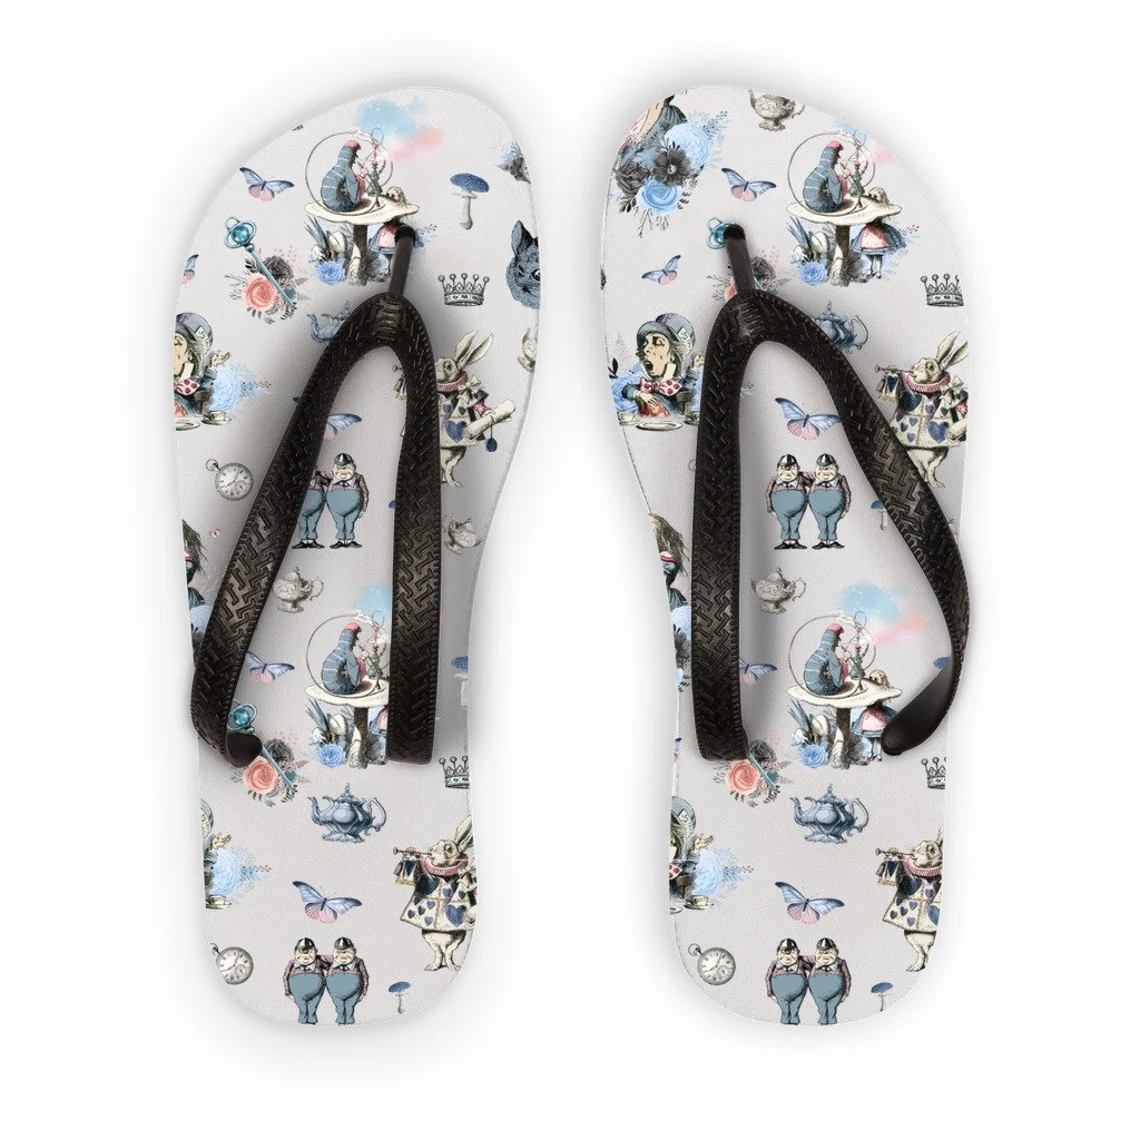 Image of pair of flip flops featuring images from Alice in Wonderland (the book). 